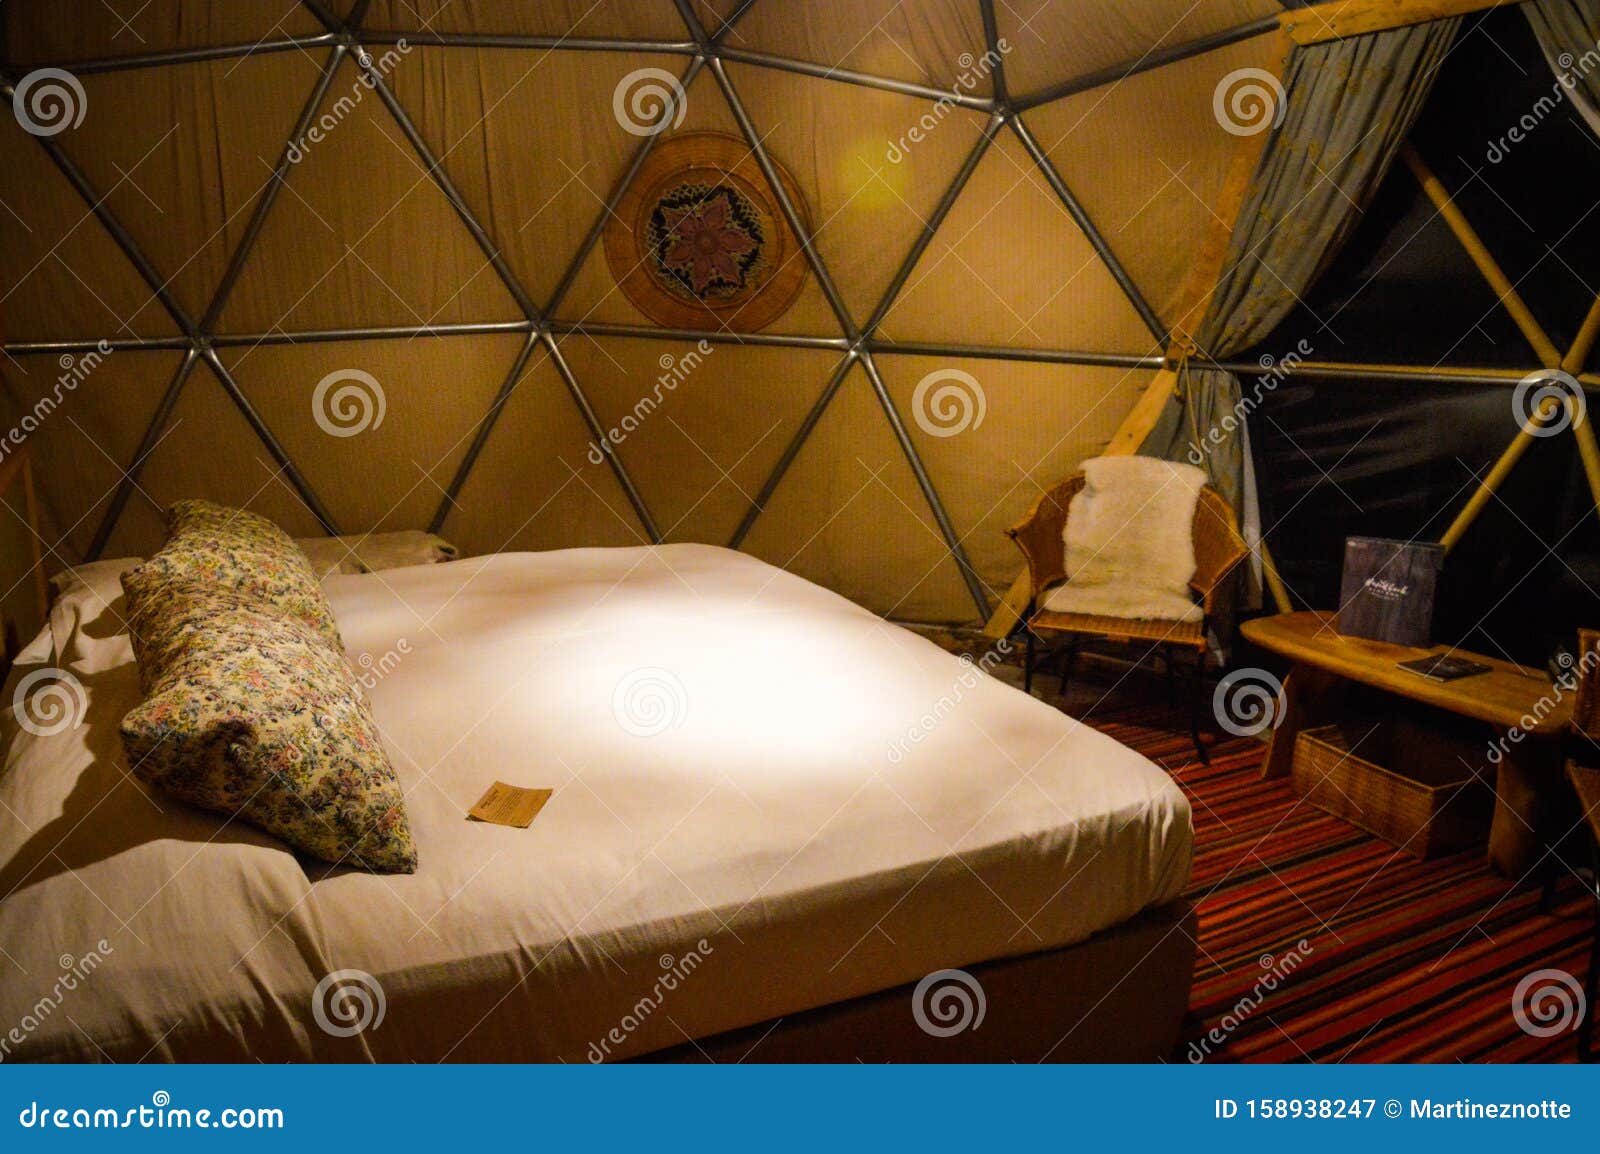 bed and interior of dome on luxury glamping hotel